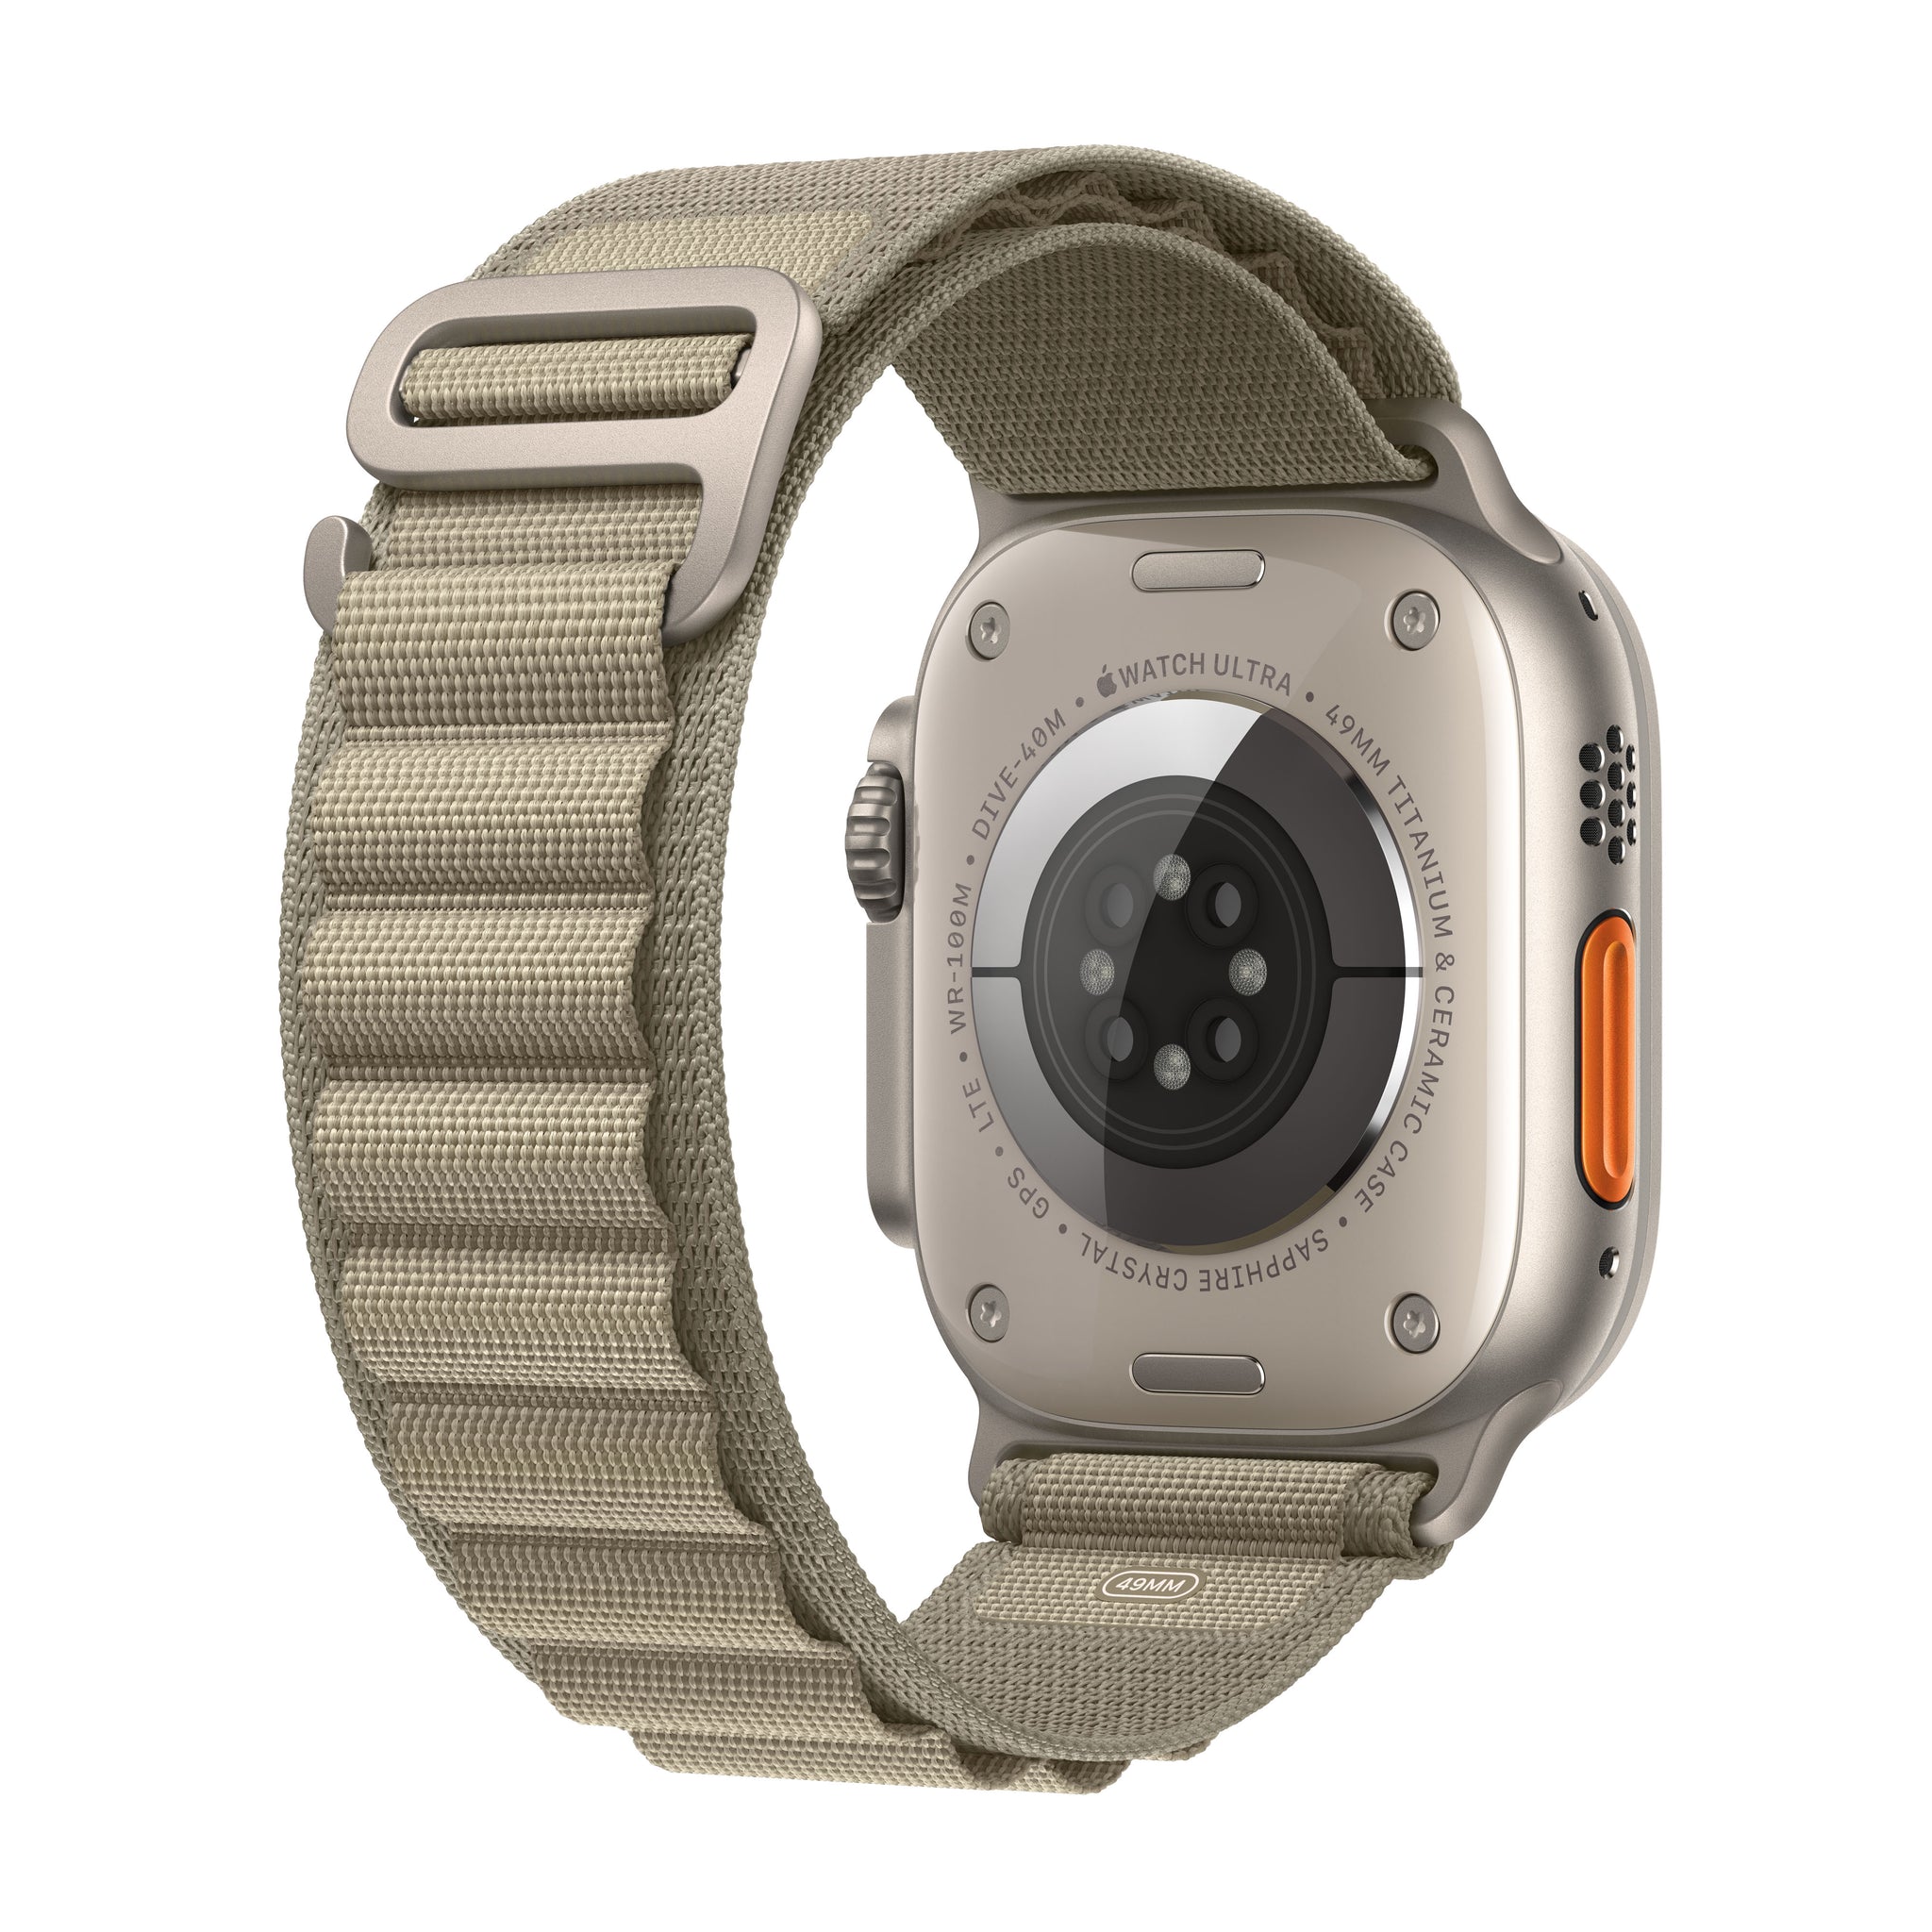 Apple Watch Olive Namibia 2 + - 49mm with Titanium Alpi Cellular, GPS iStore Case Ultra